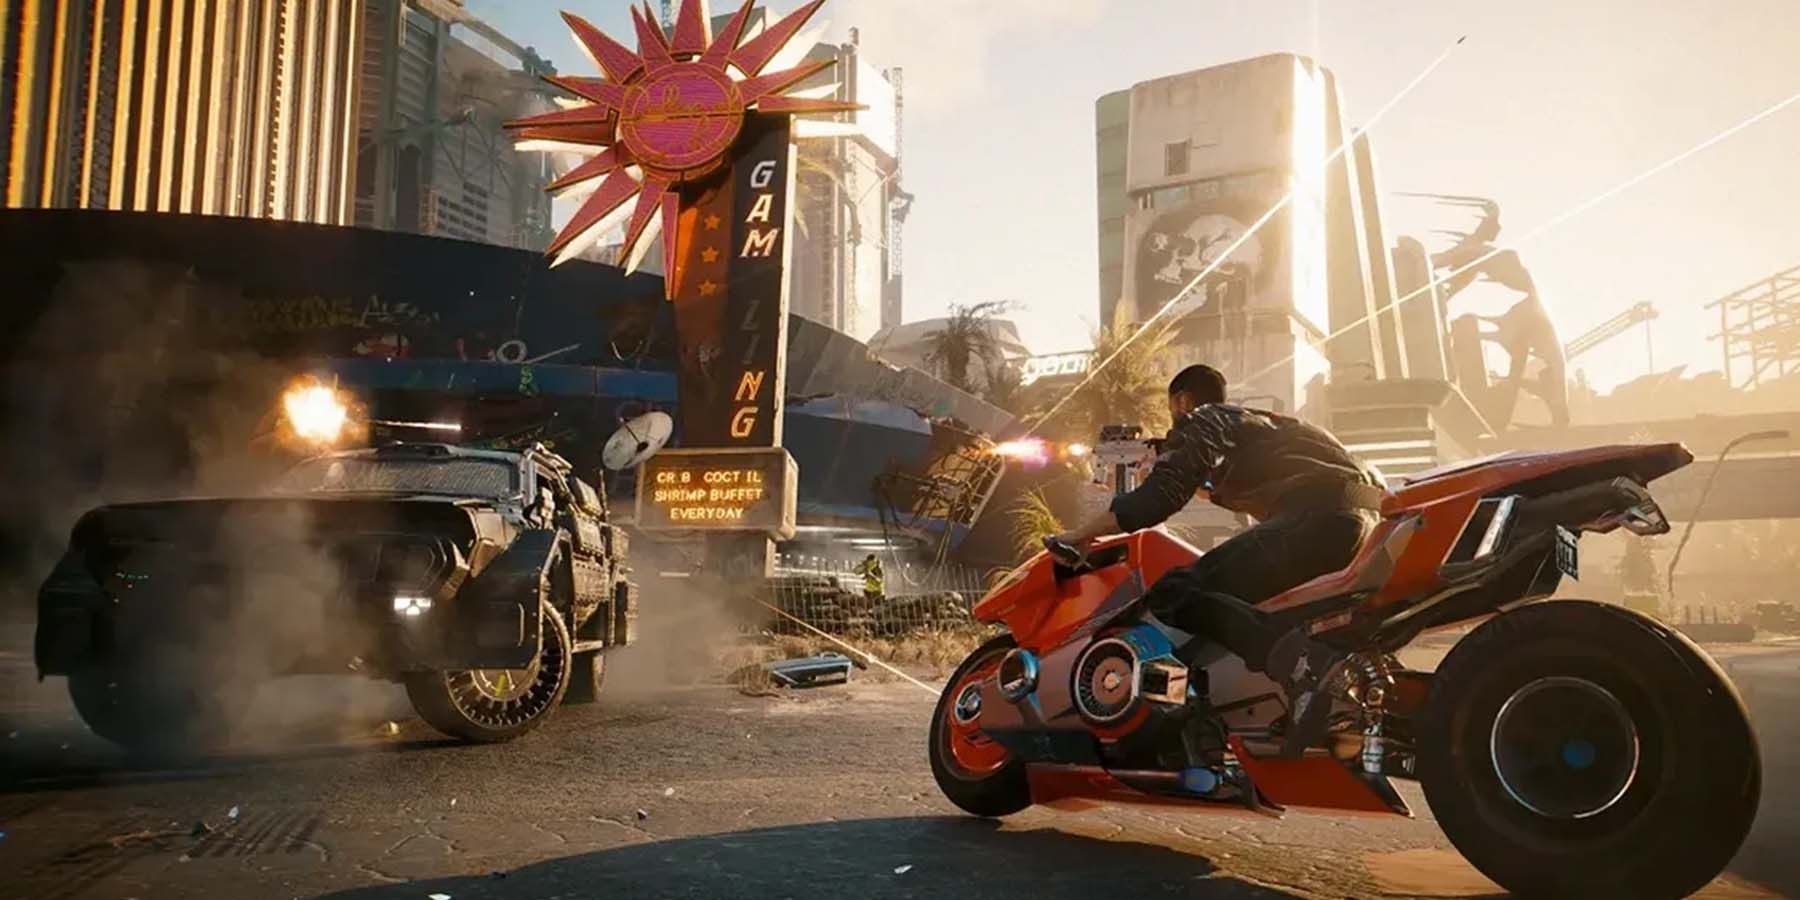 The Next Cyberpunk 2077 Game is Stuck Between a Rock and a Hard Place